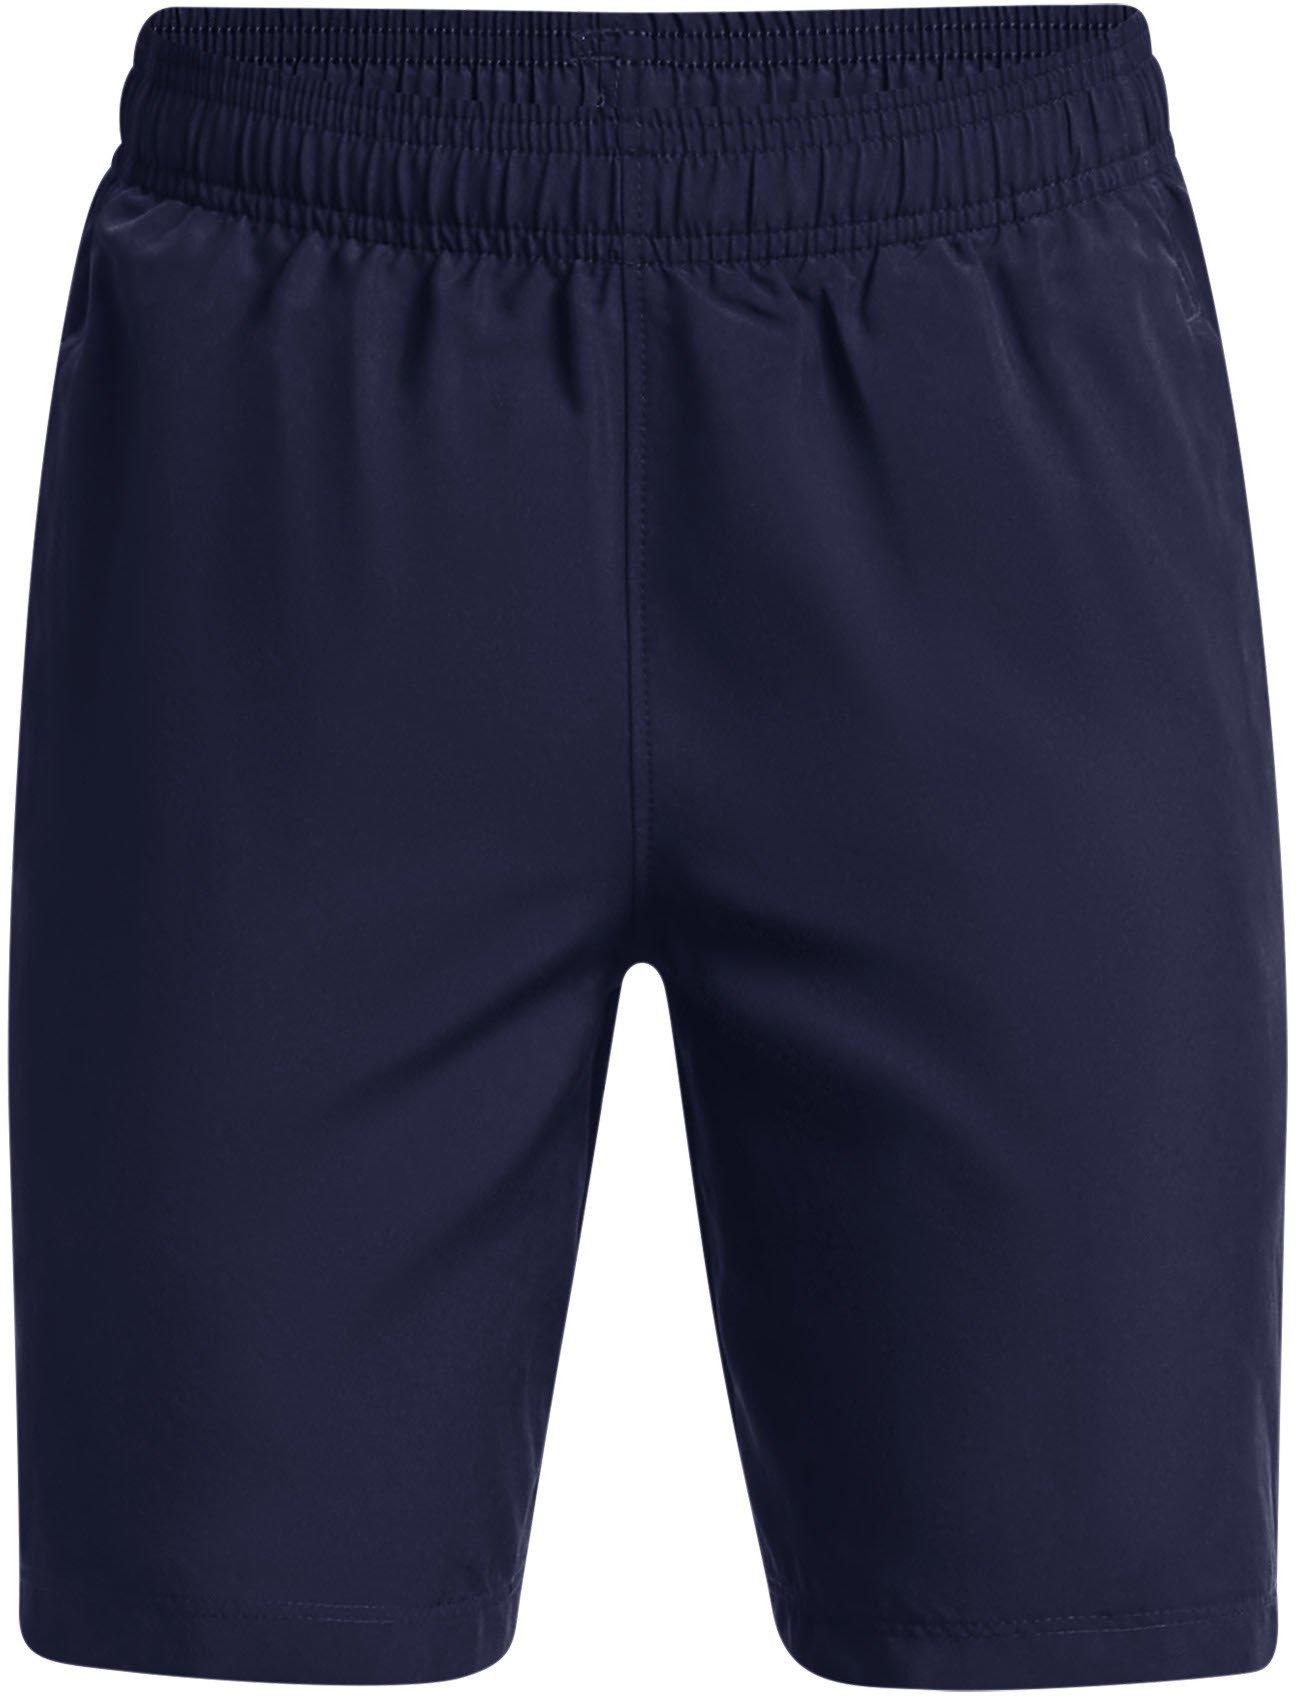 Under Armour Woven Graphic Shorts-NVY S